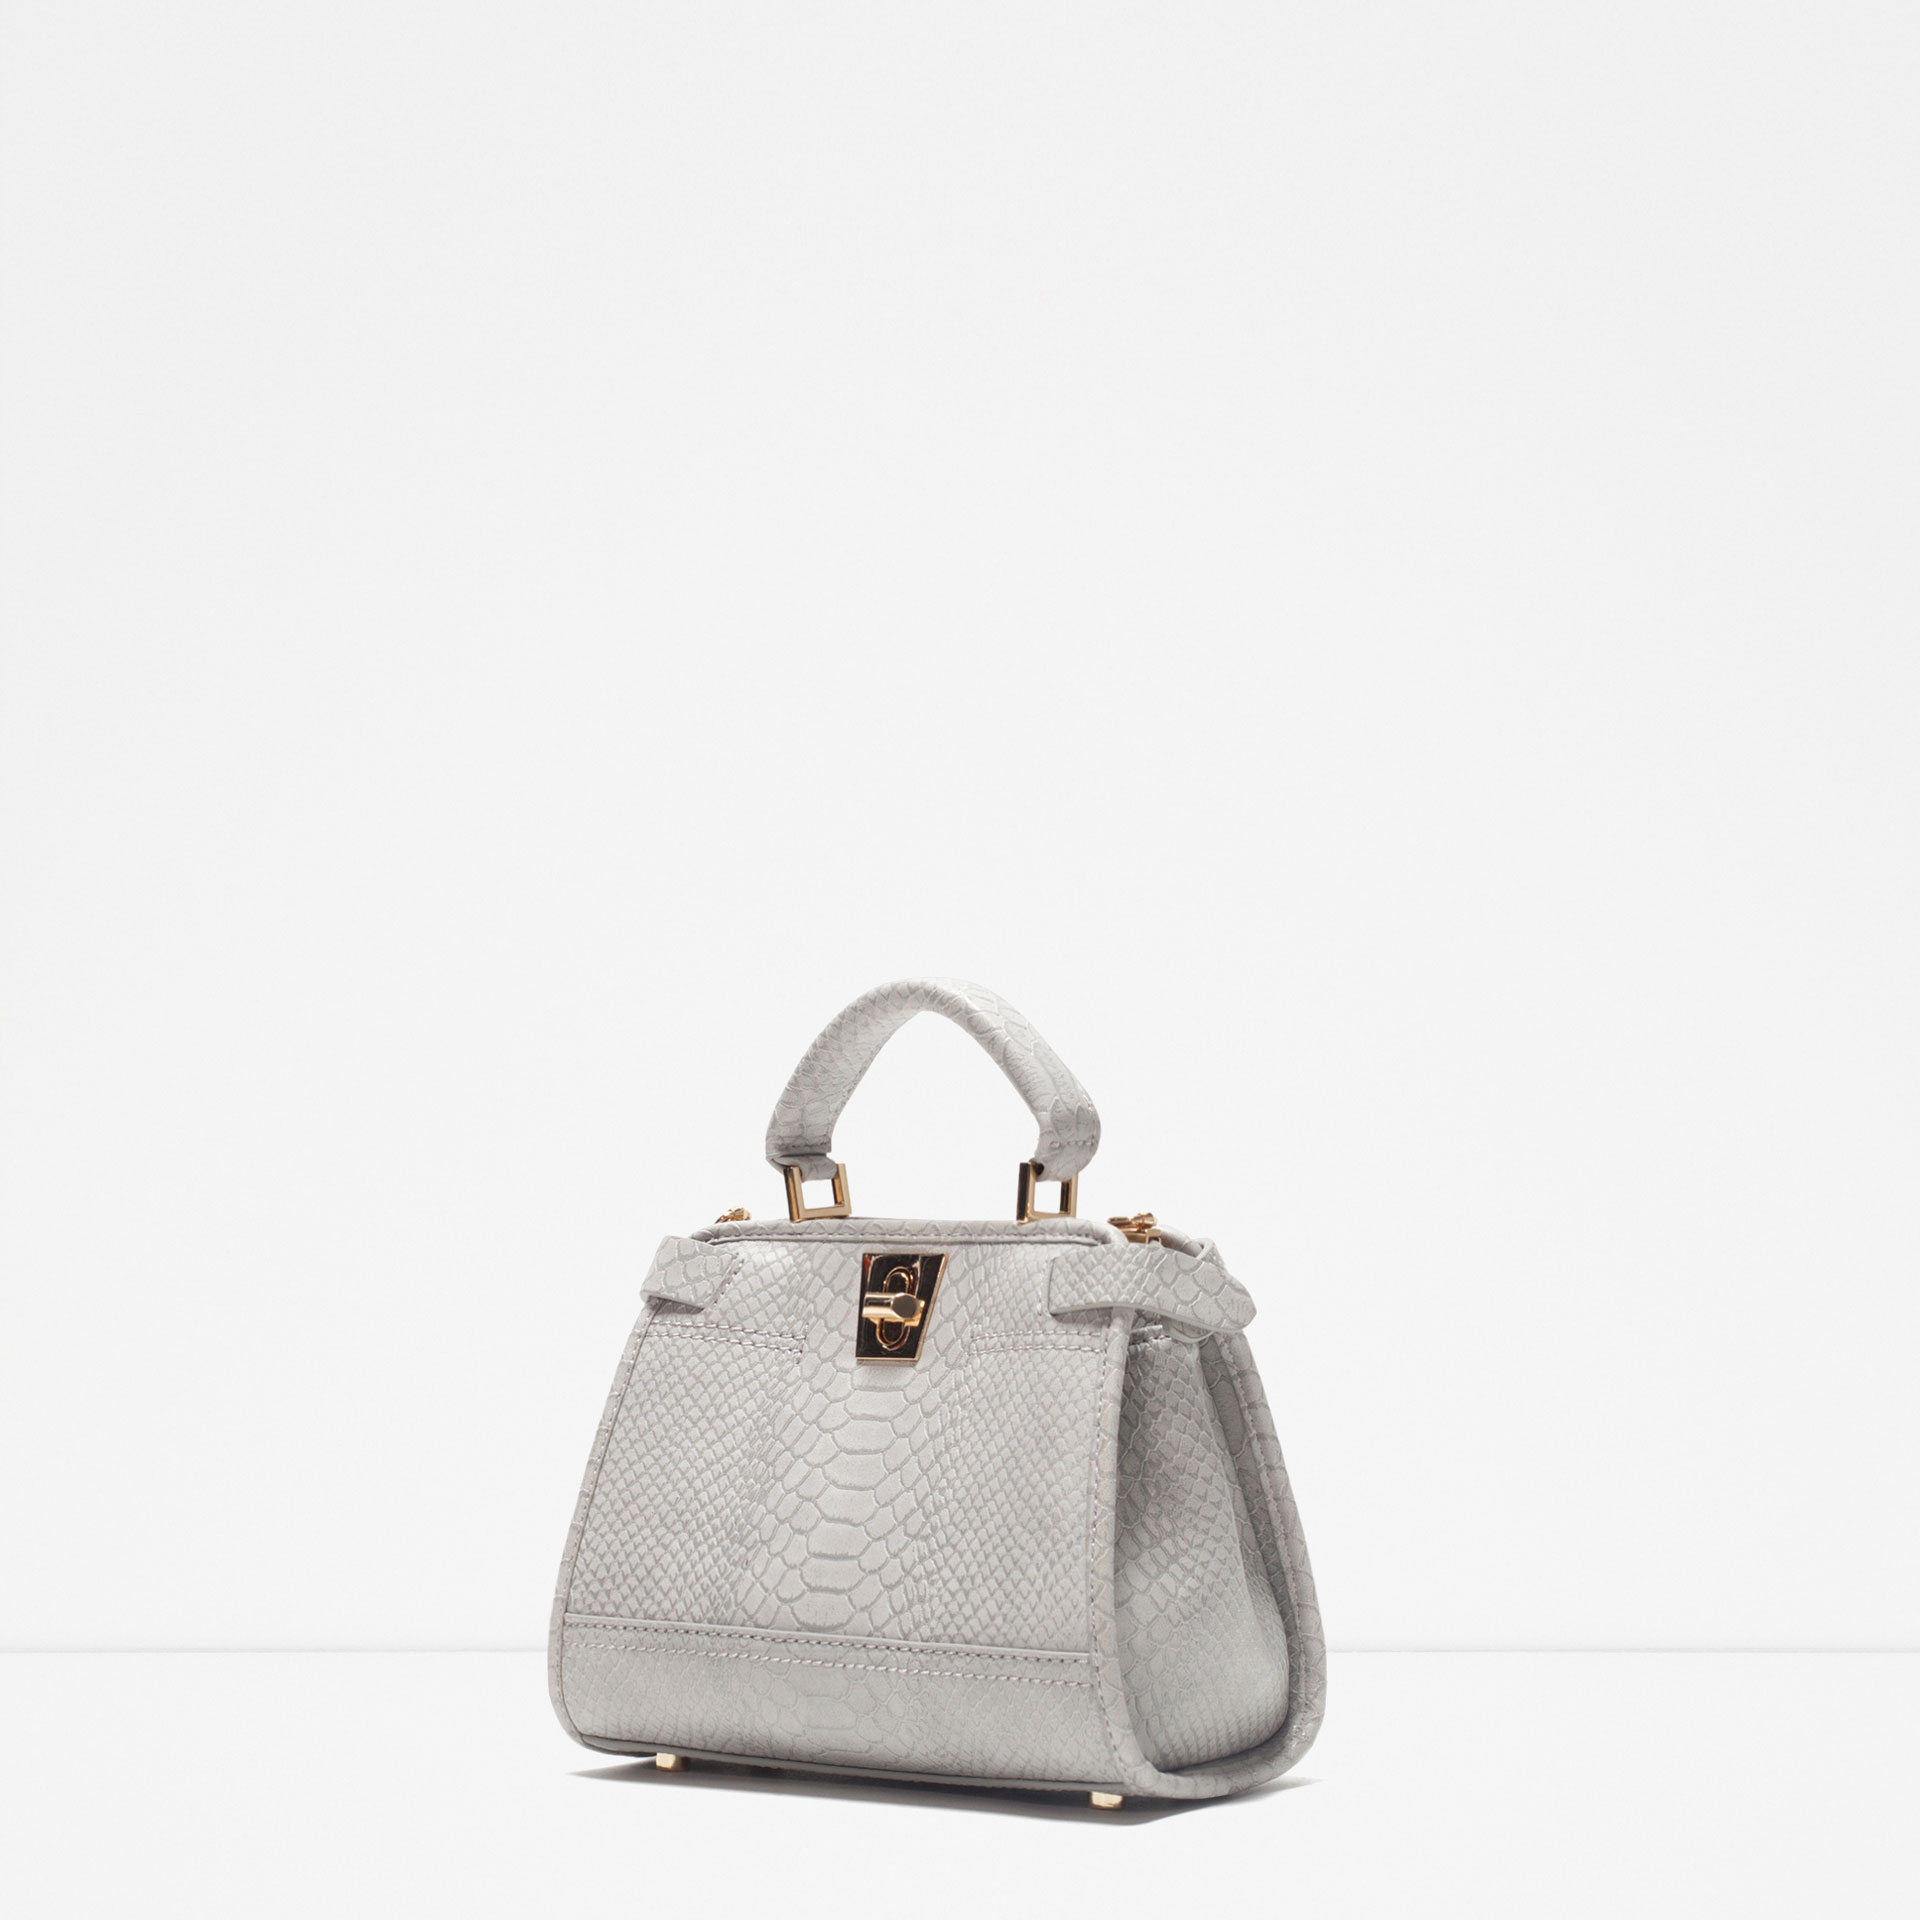 Bomb Product of the Day: Zara’s Grey Mini City Bag with Double Closure